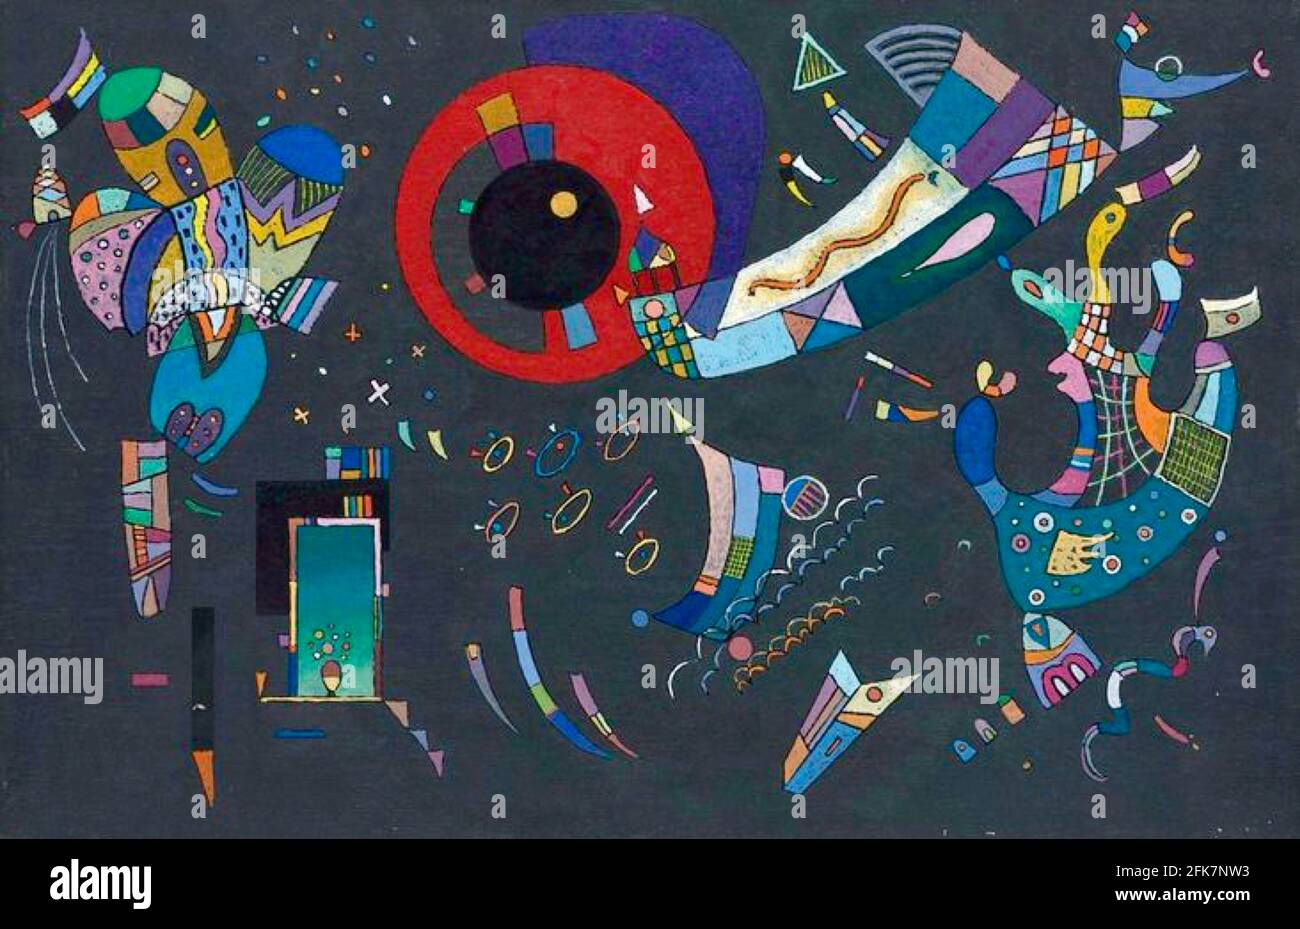 Kandinsky artwork. Night Manoeuvre or Lost in Space maybe. Untitled artwork. You choose. Stock Photo